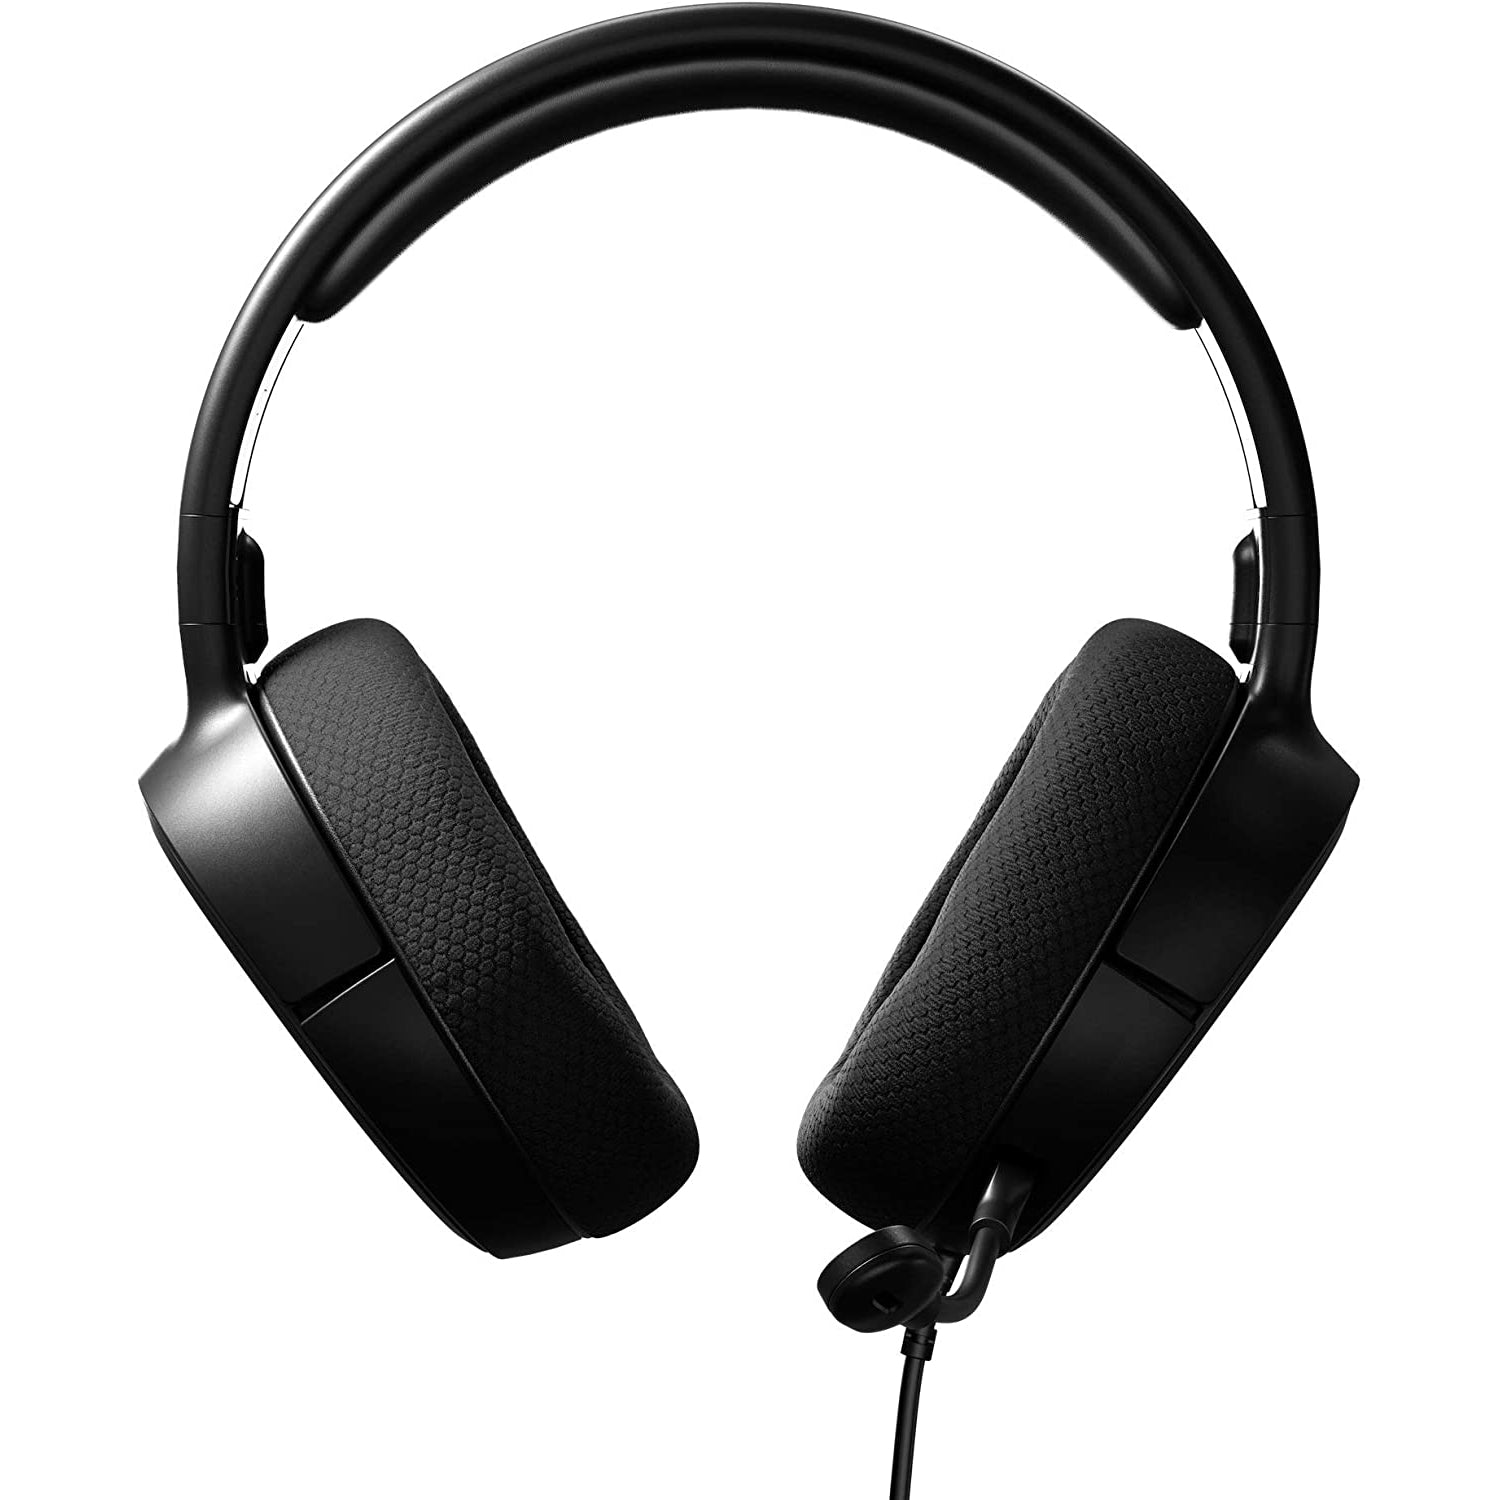 SteelSeries Arctis 1 Wired Gaming Headset for Xbox, PC & Android, Black - Refurbished Pristine